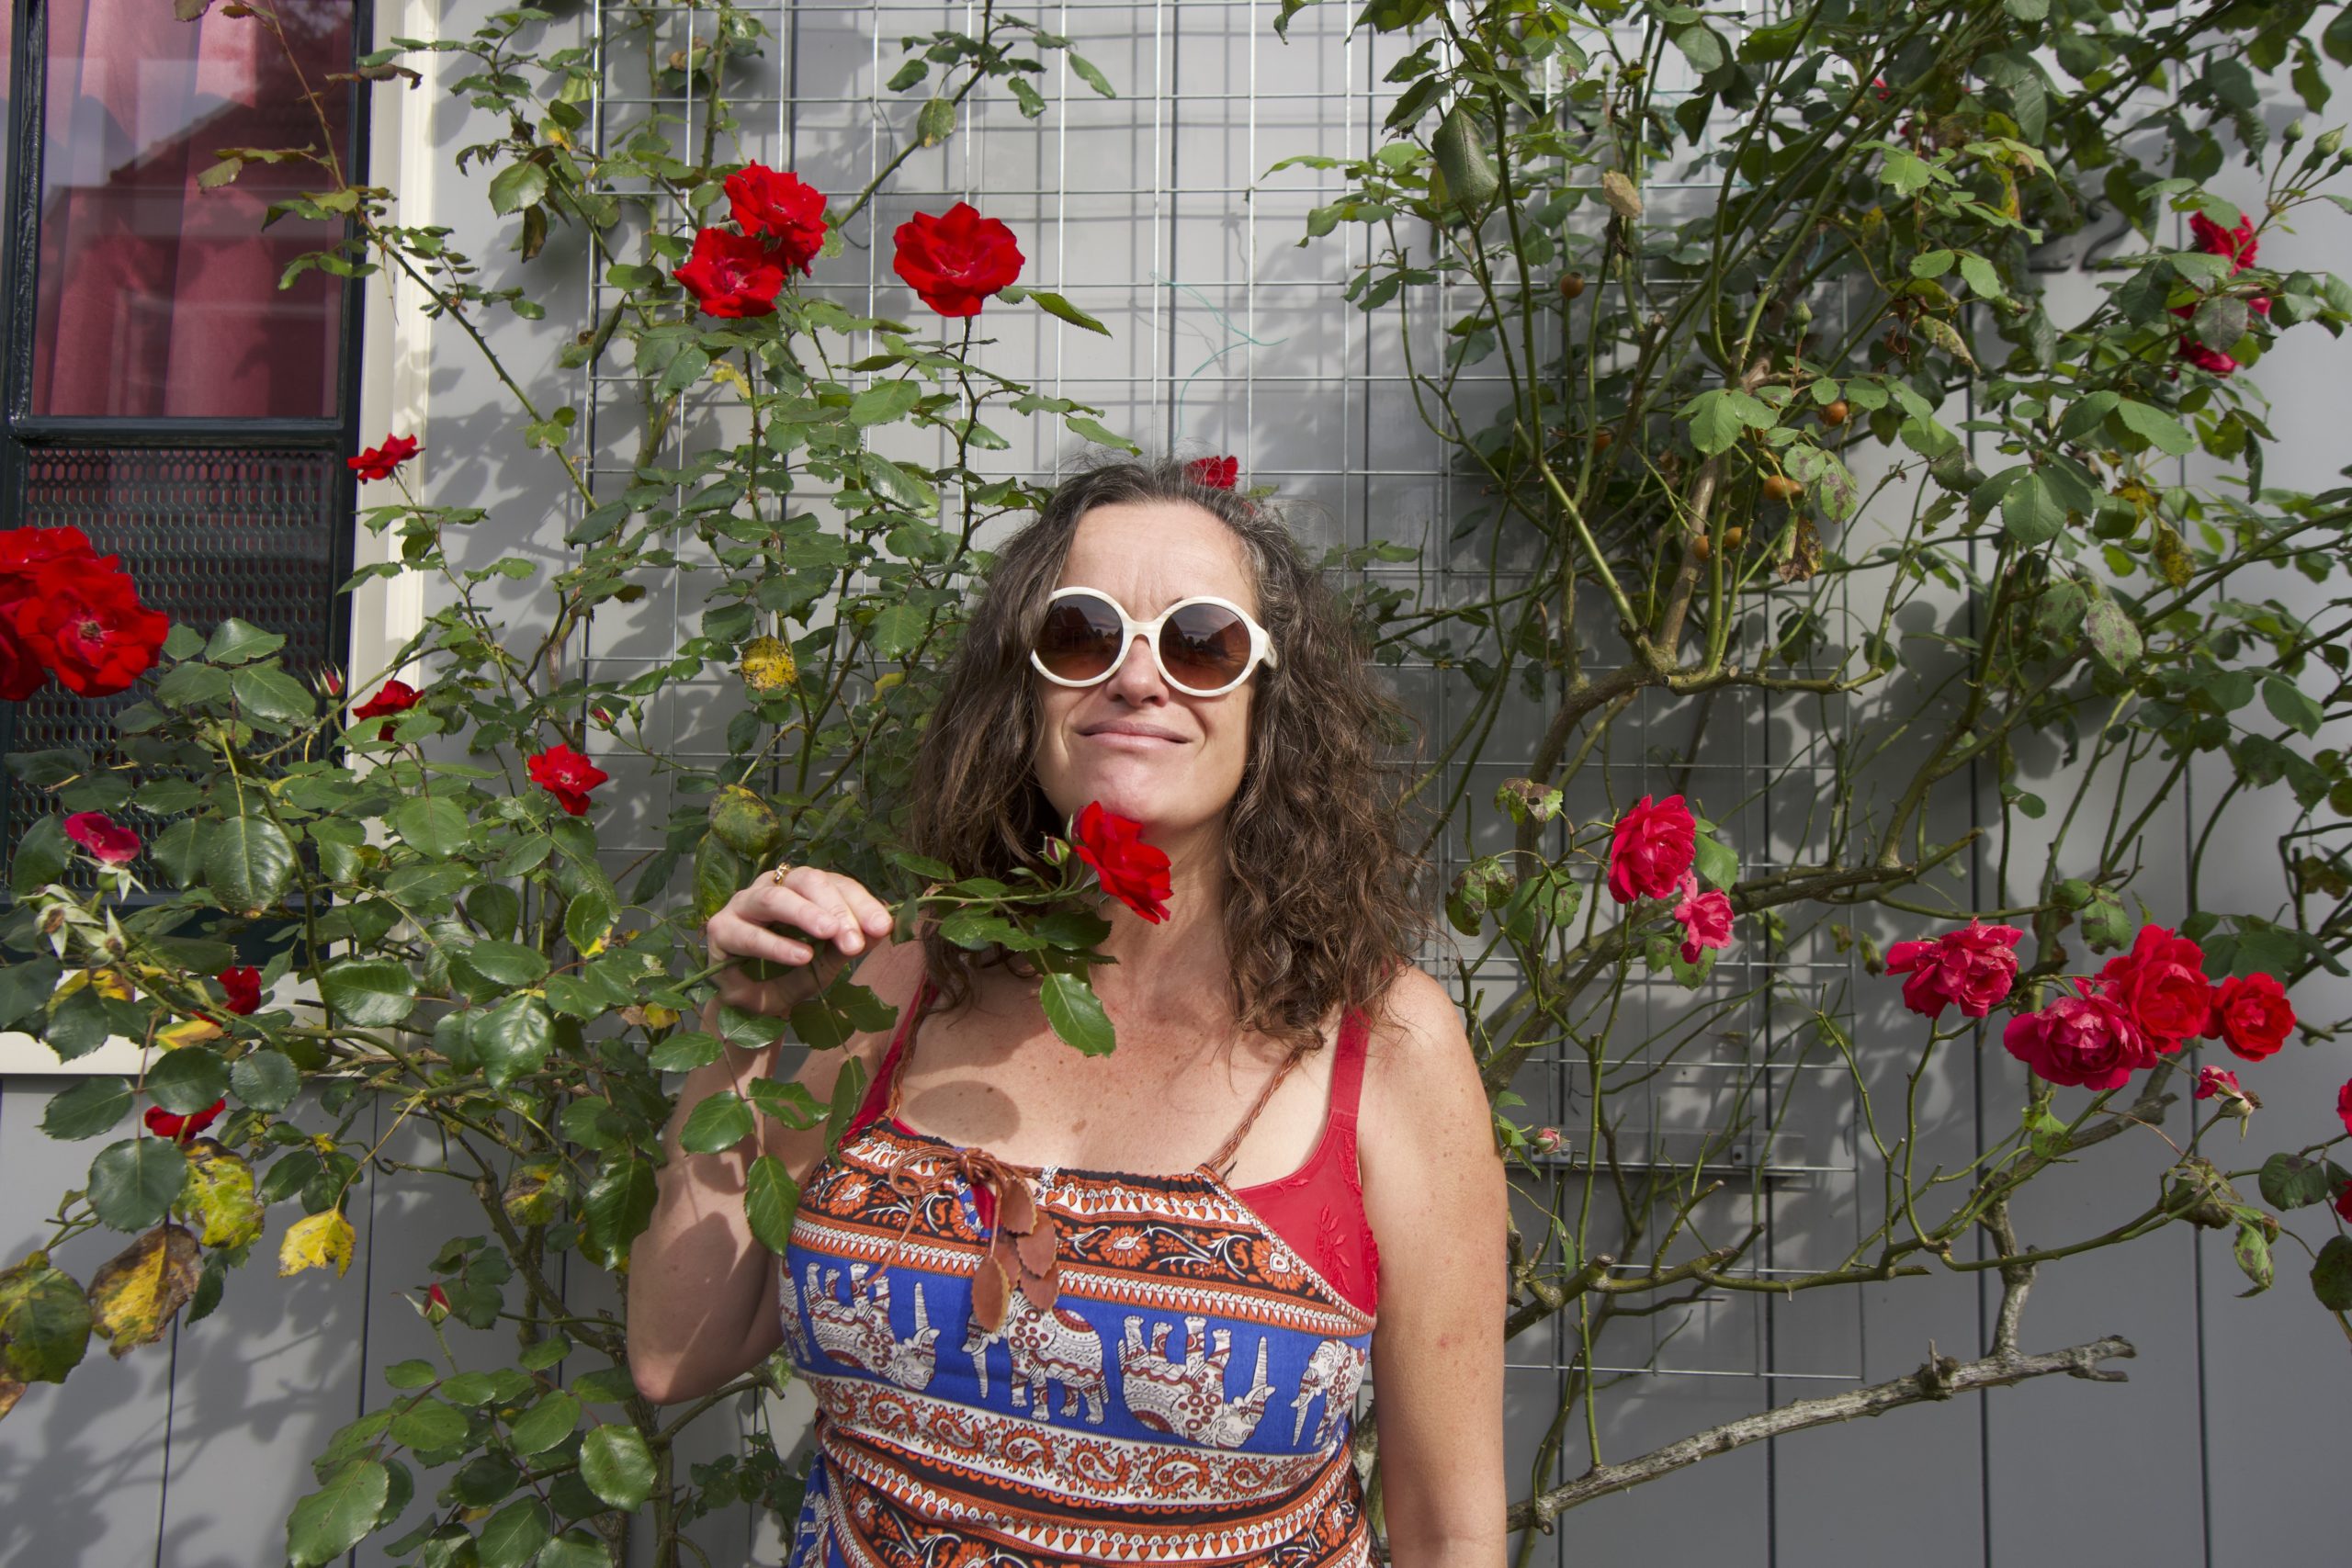 Pilar with some roses hanging from the facade of one of the houses in Broek in Waterland